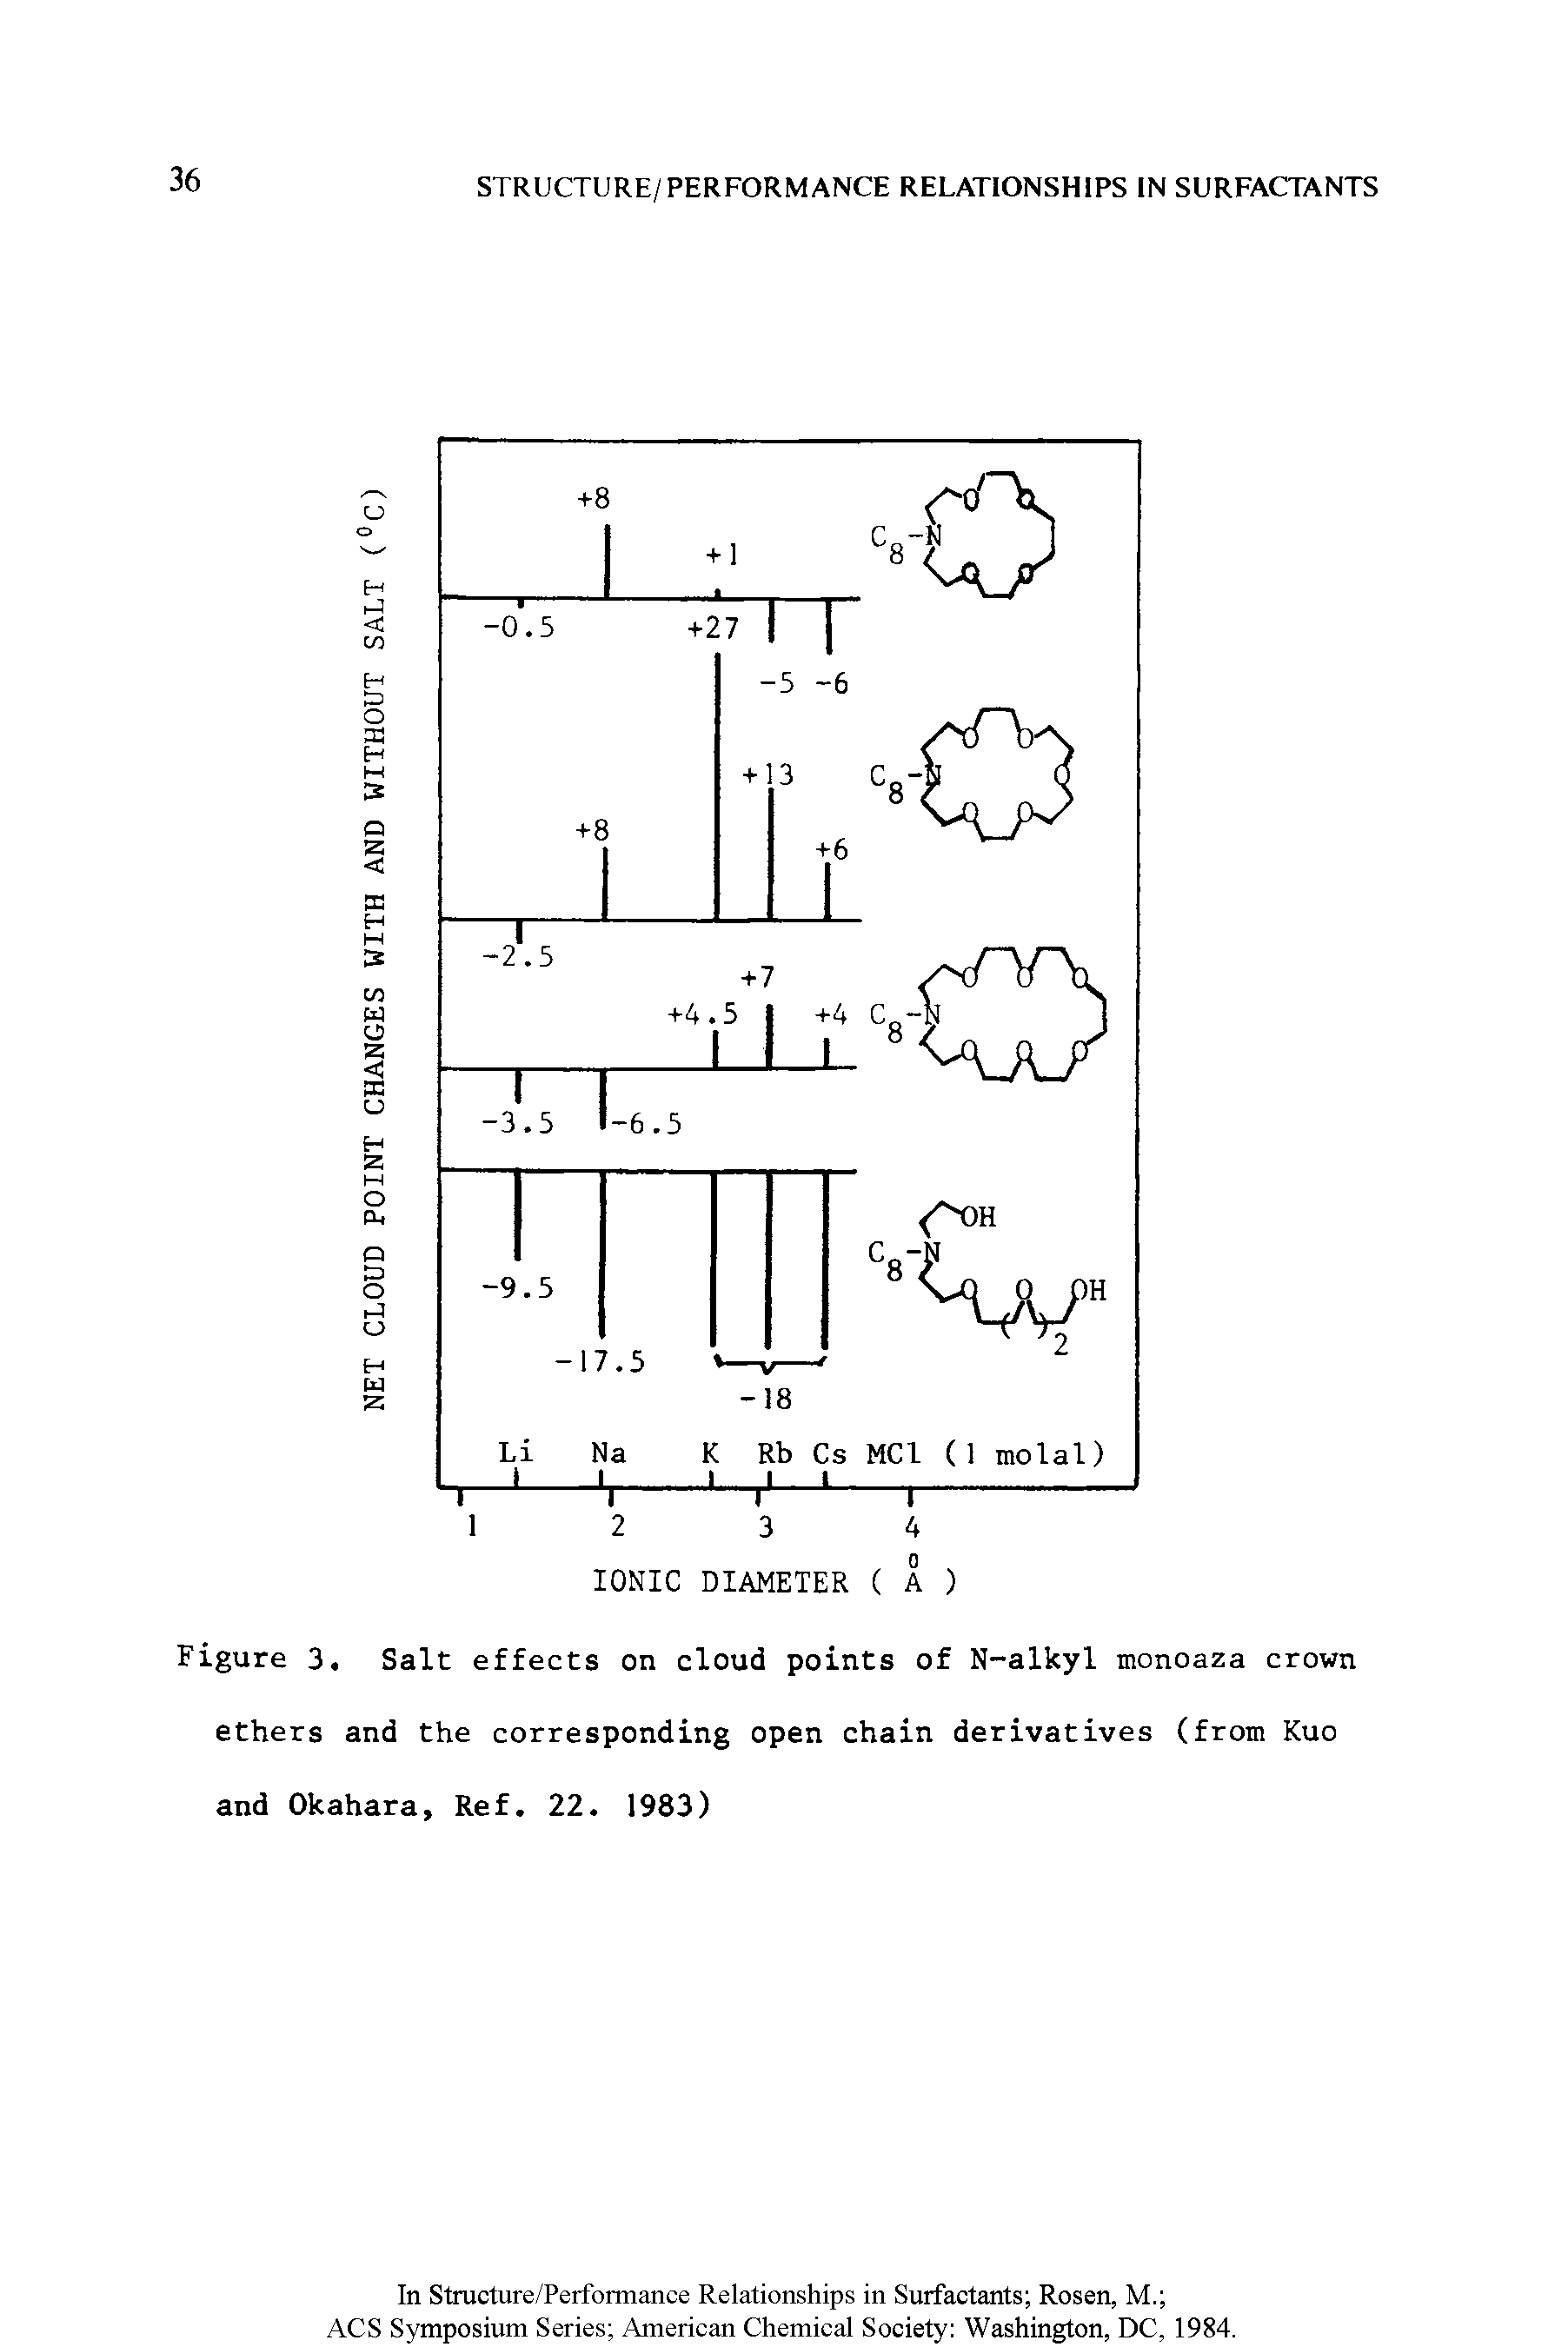 Figure 3. Salt effects on cloud points of N-alkyl monoaza crown ethers and the corresponding open chain derivatives (from Kuo and Okahara, Ref. 22. 1983)...